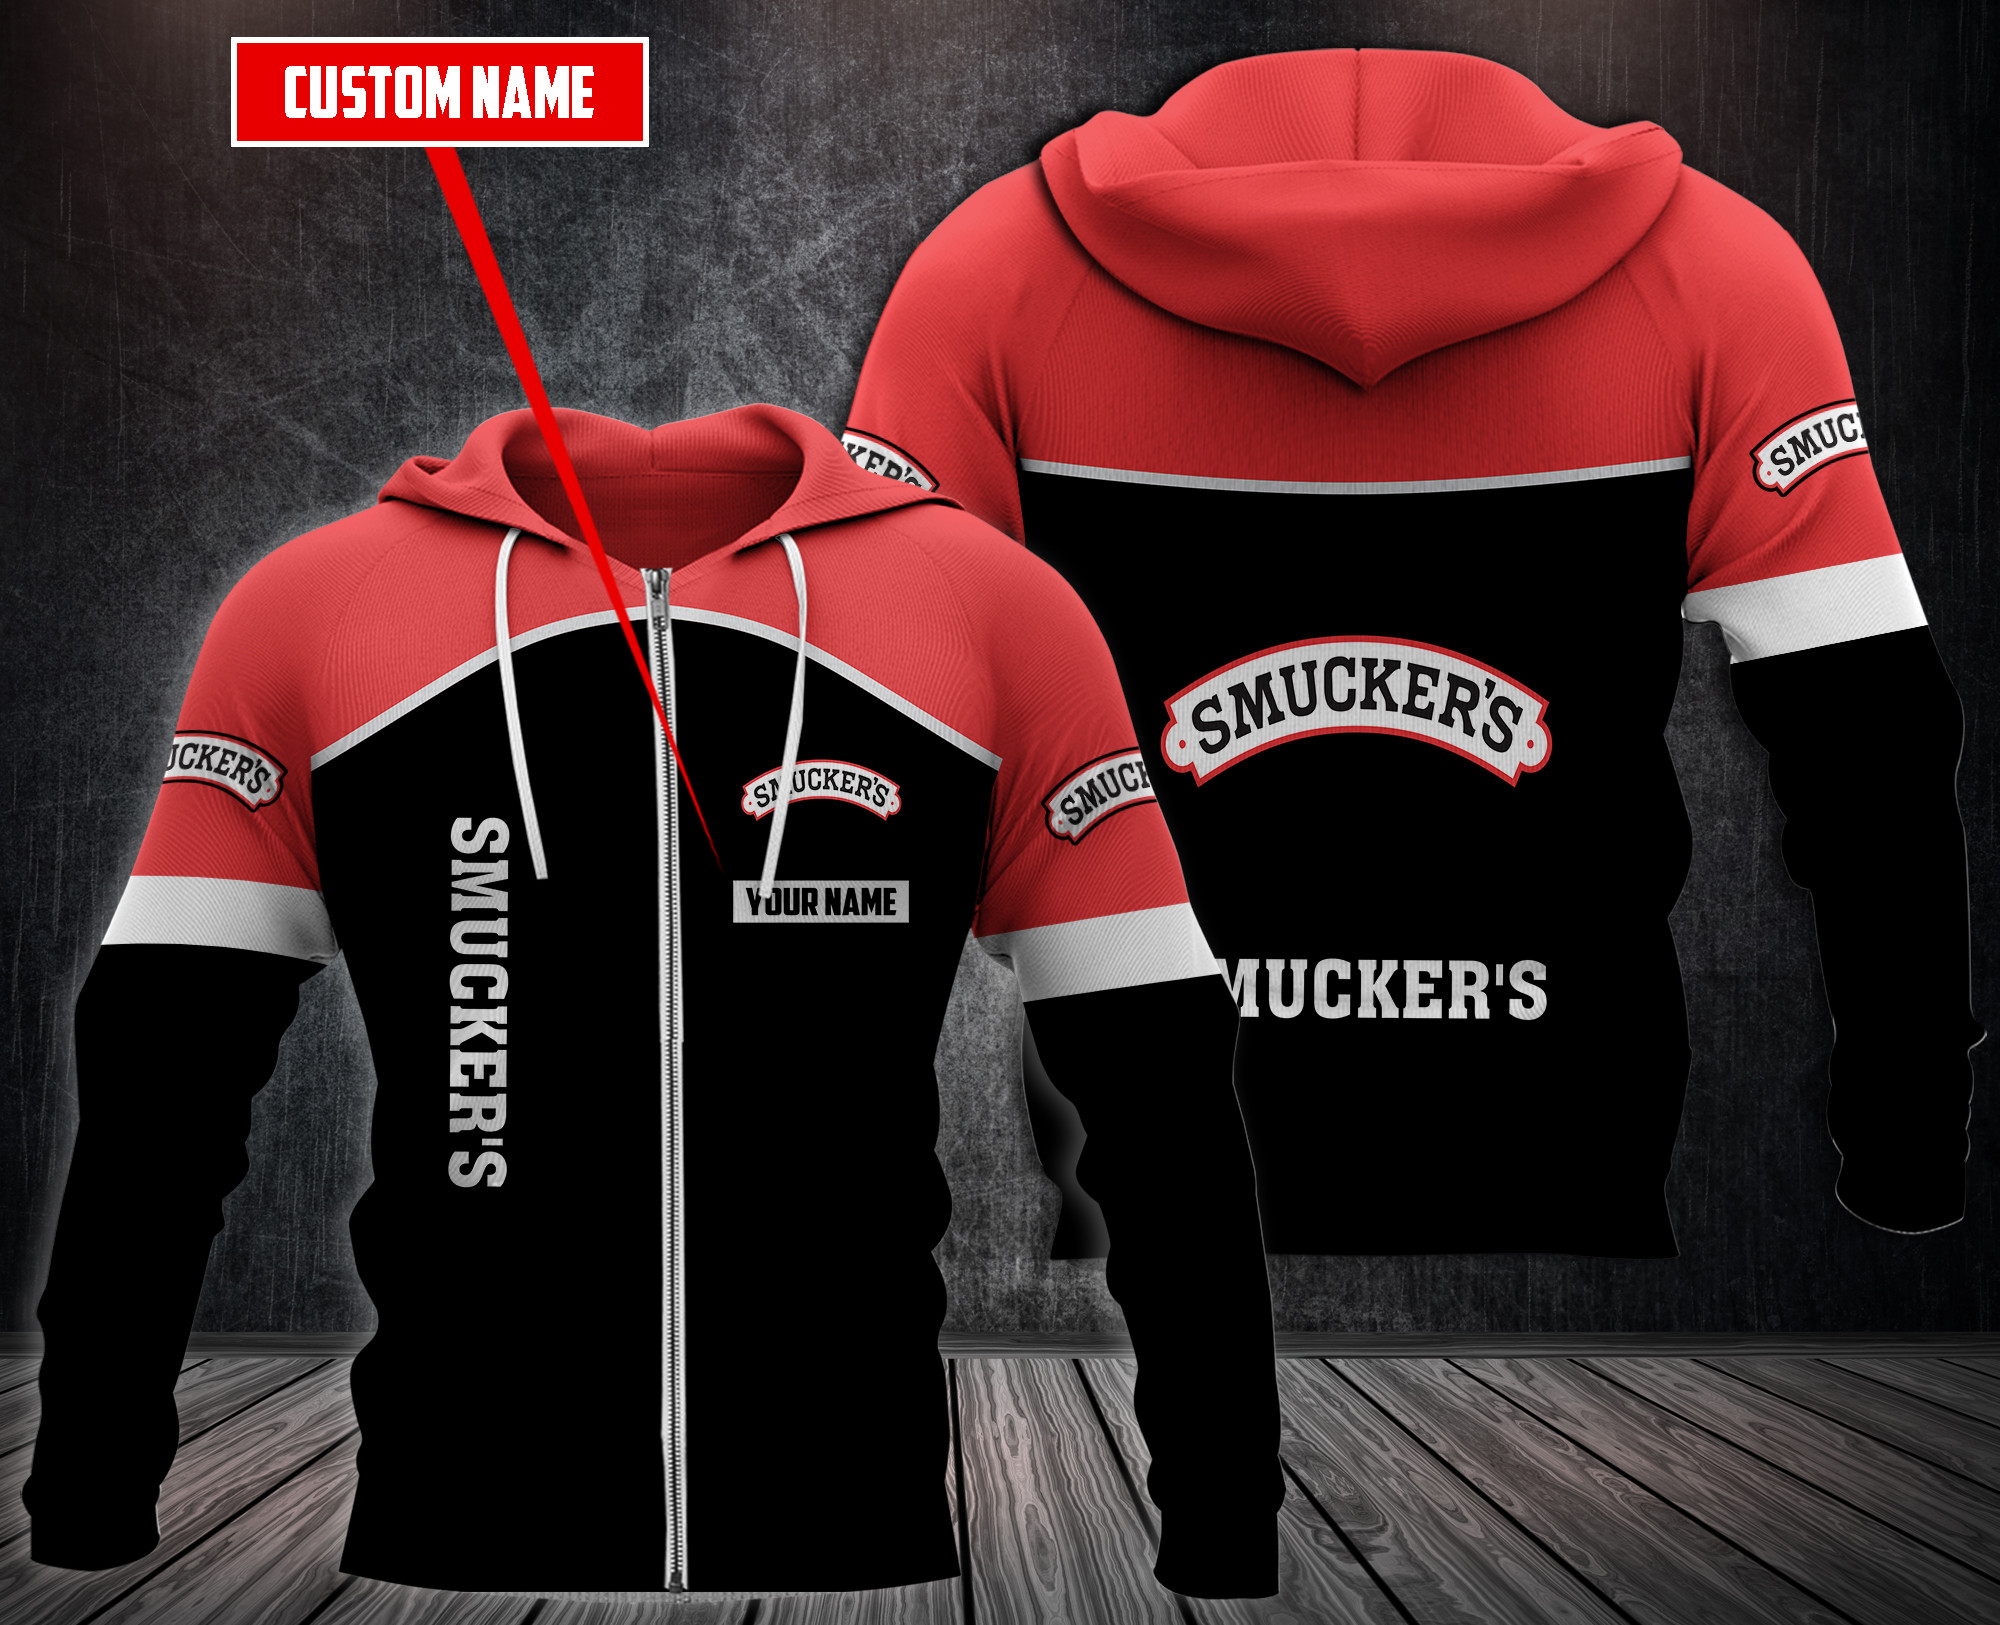 Choose the right hoodies for you on our boxboxshirt and ethershirt websites in 2022 99